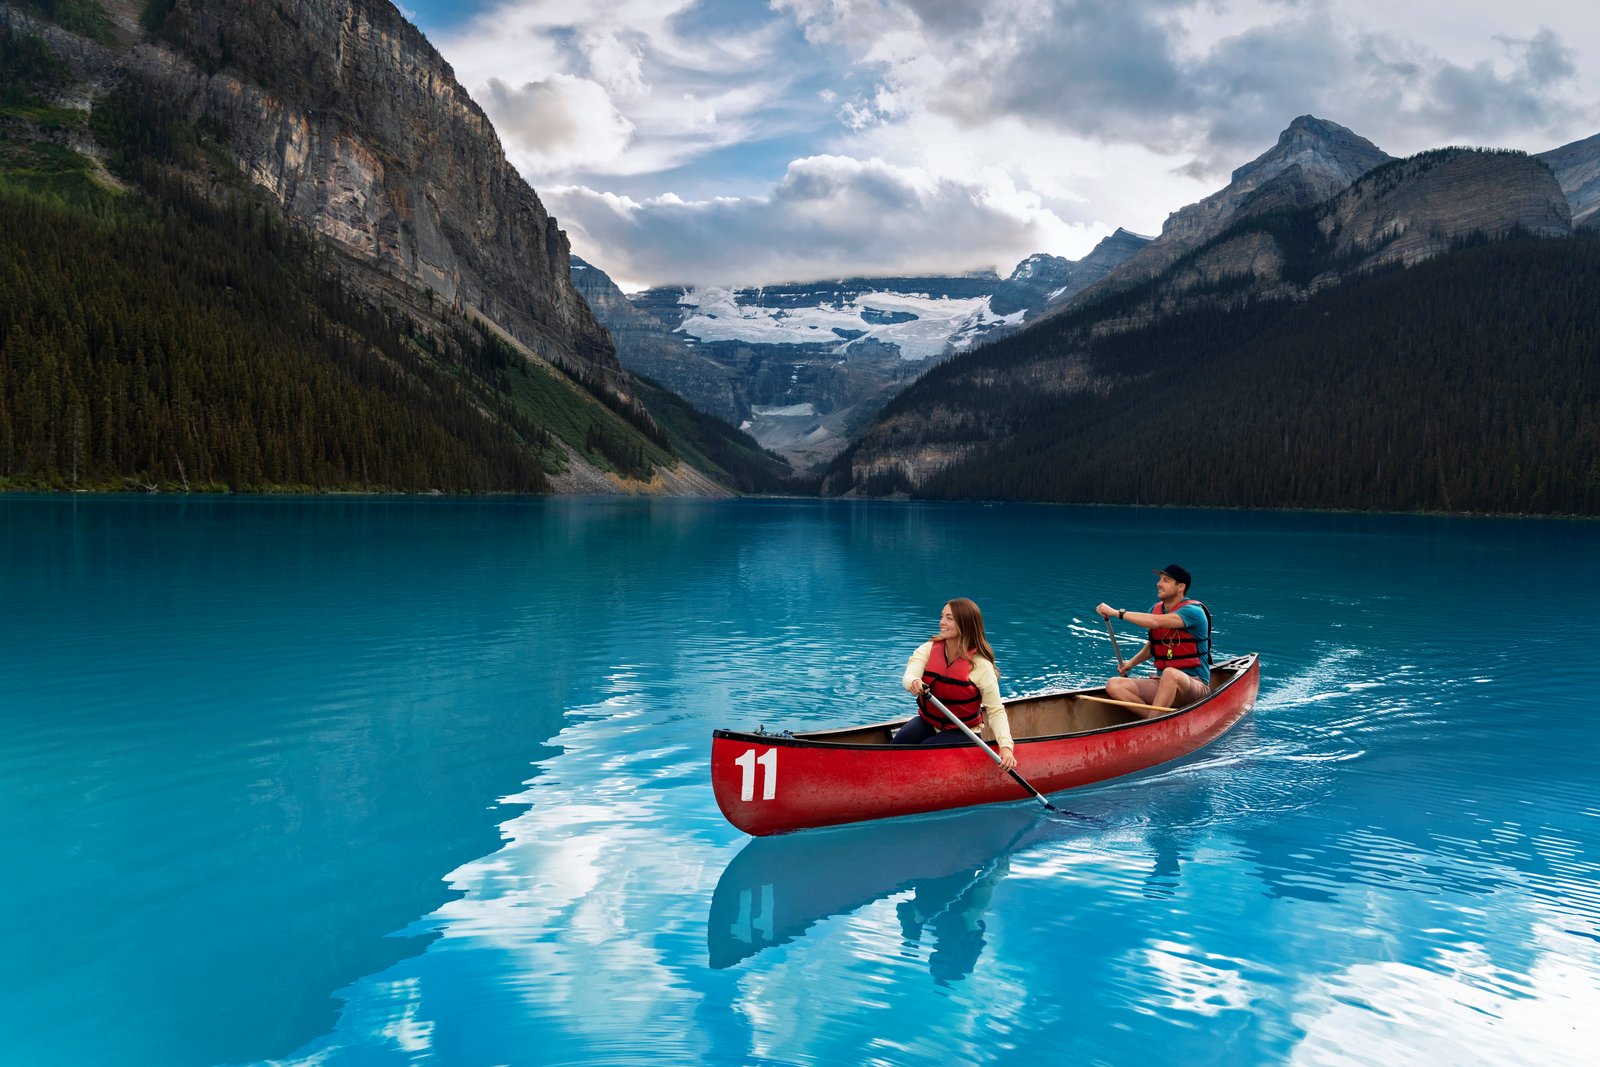 Couple canoeing, surrounded by mountains at Lake Louise in Banff National Park.